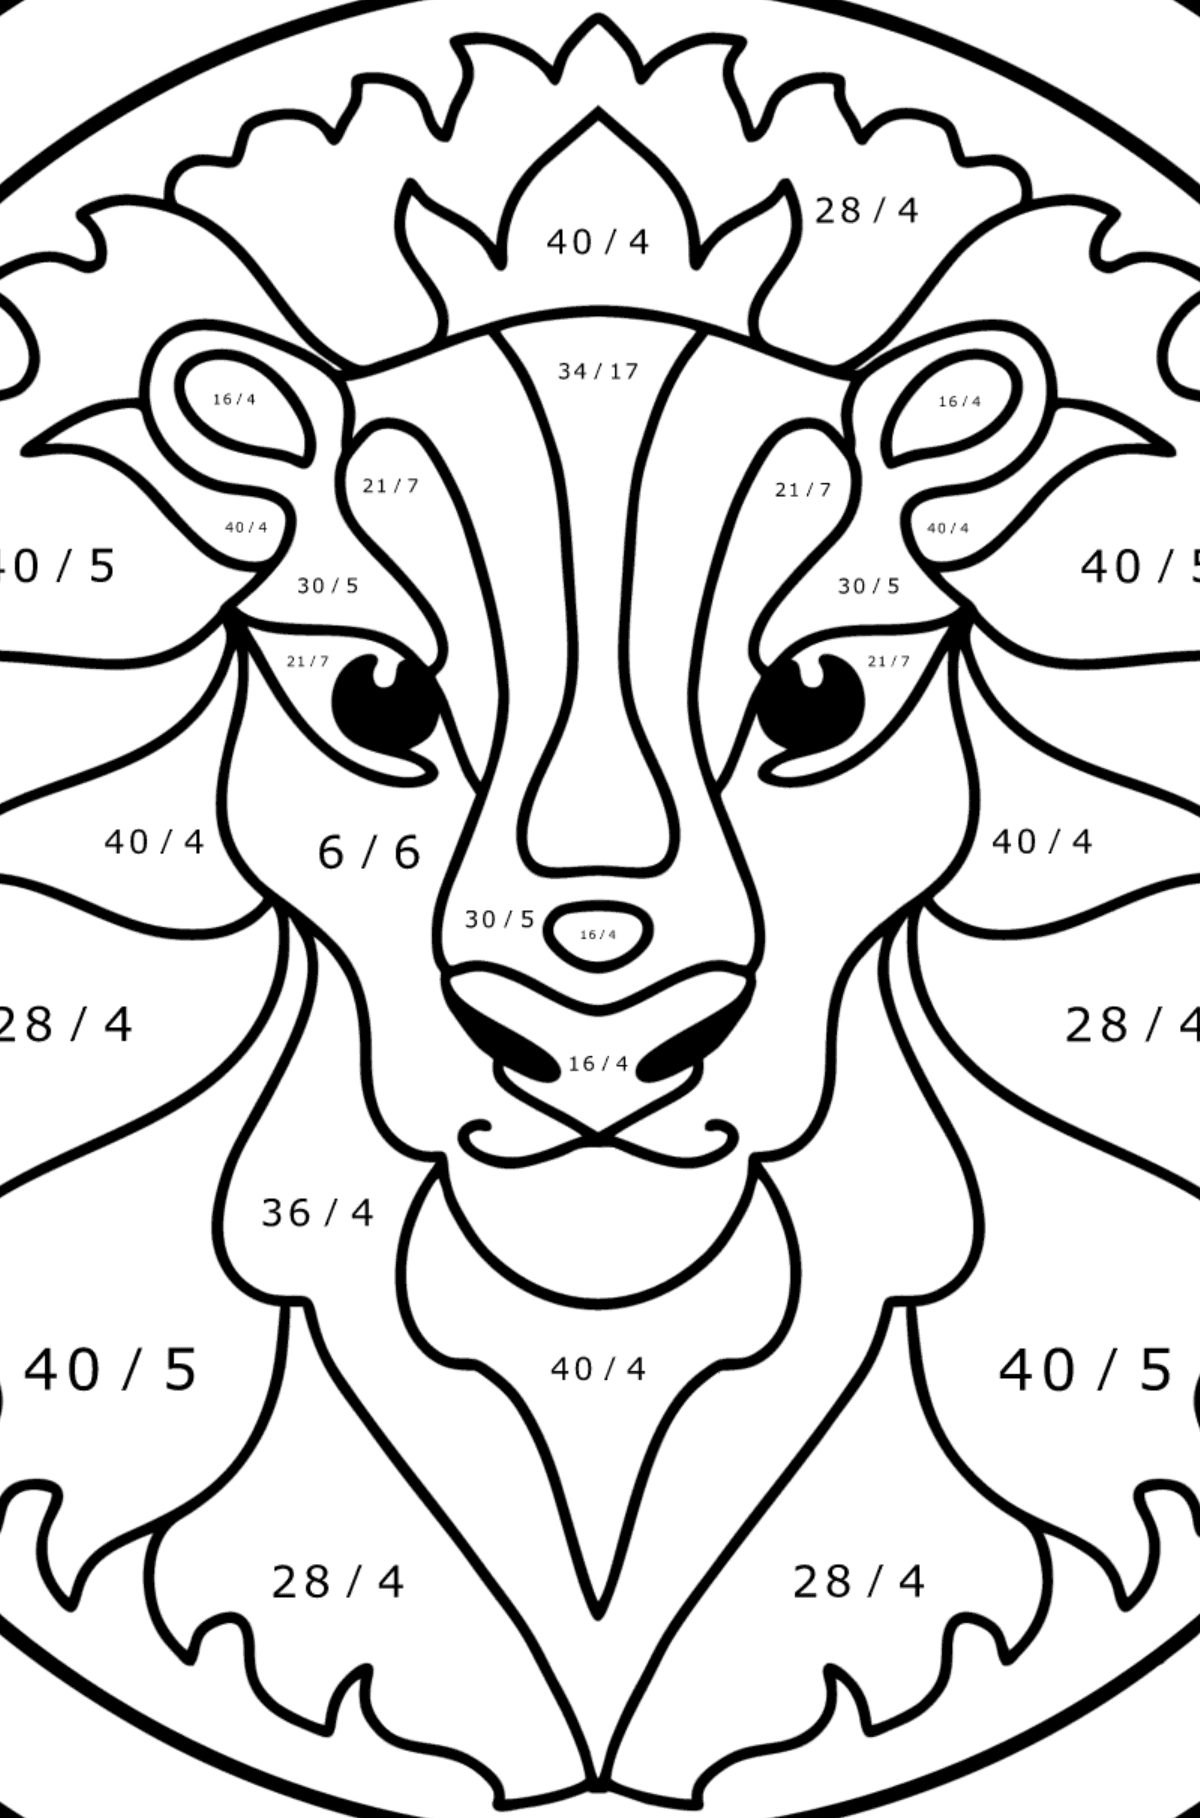 Coloring page for kids - zodiac sign Leo - Math Coloring - Division for Kids